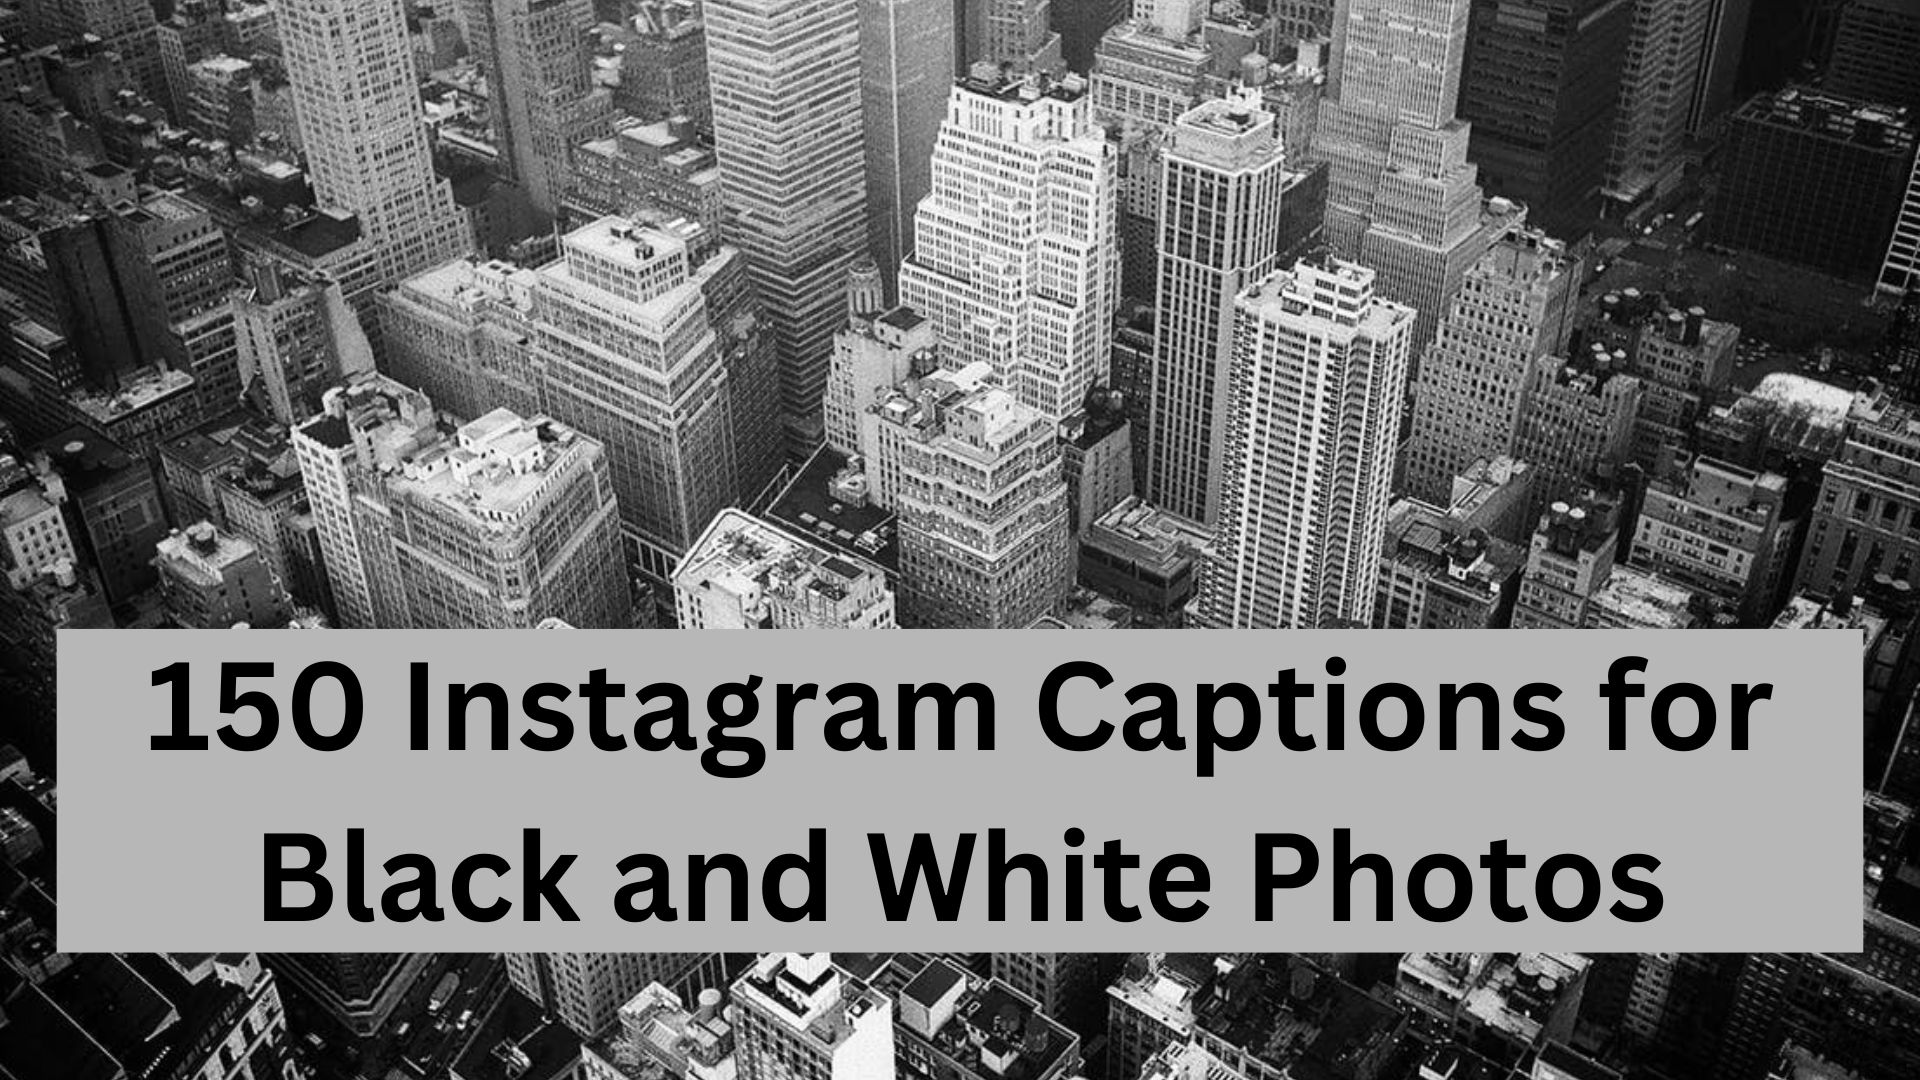 Black and white captions